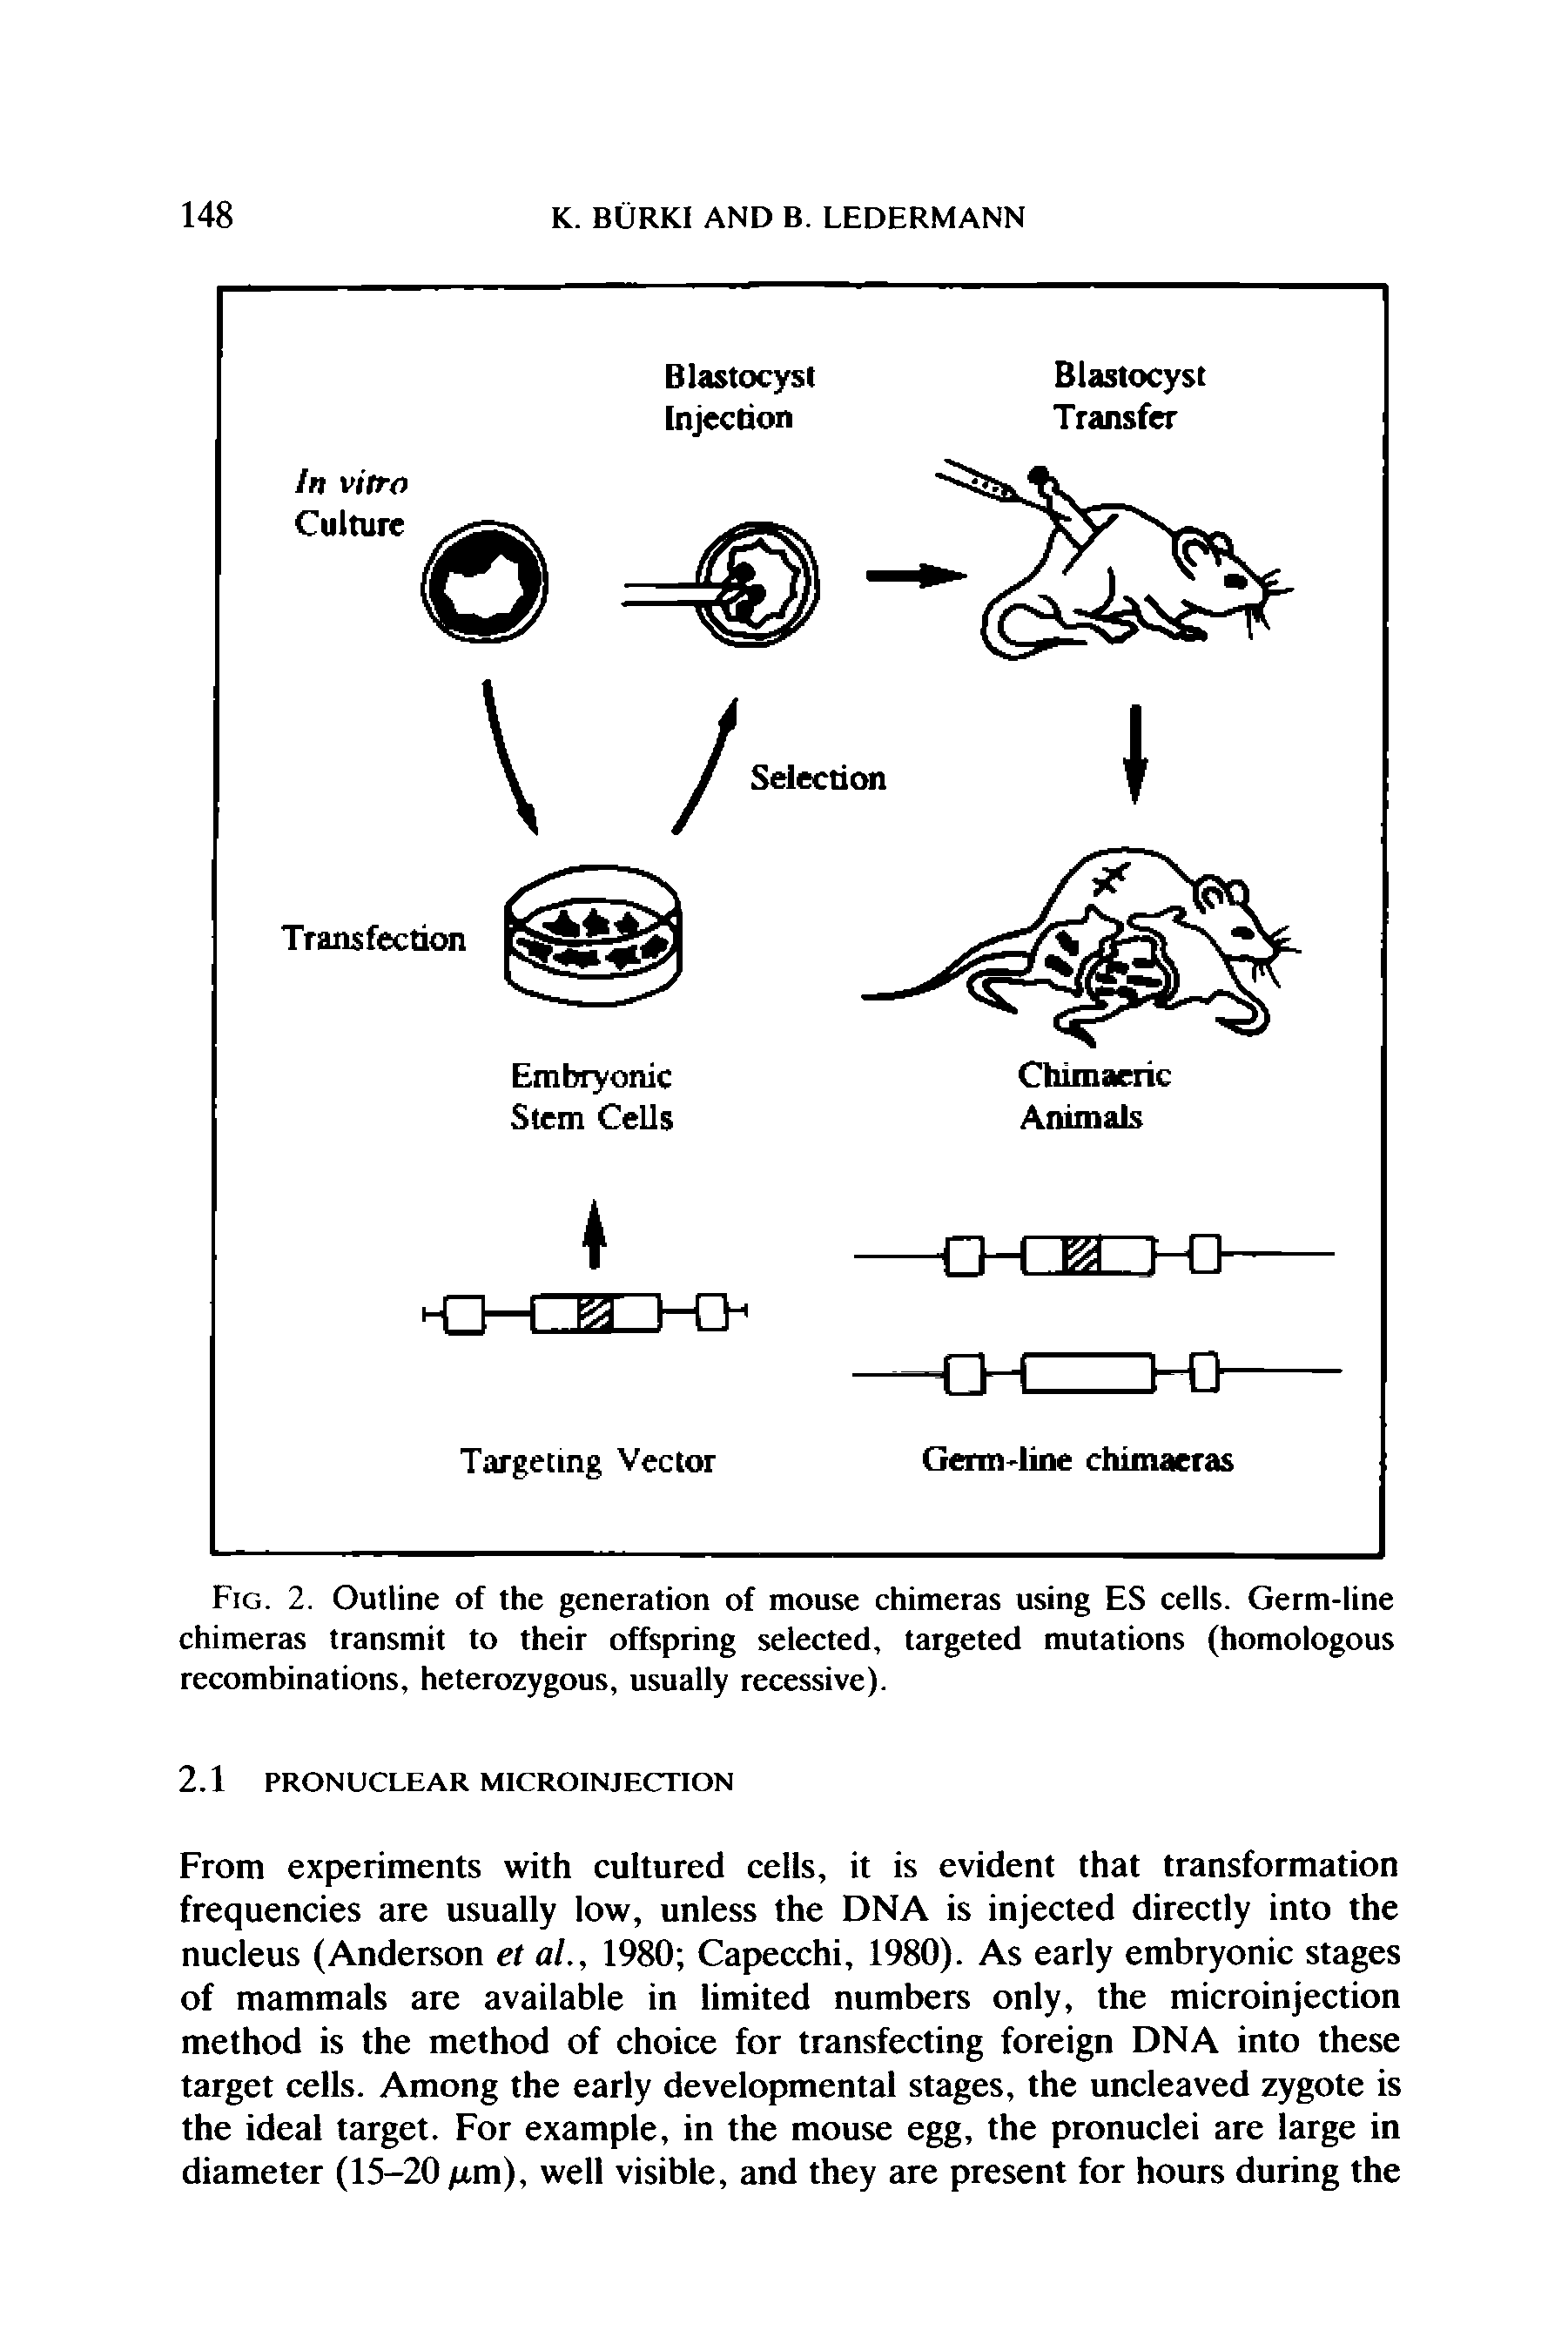 Fig. 2. Outline of the generation of mouse chimeras using ES cells. Germ-line chimeras transmit to their offspring selected, targeted mutations (homologous recombinations, heterozygous, usually recessive).